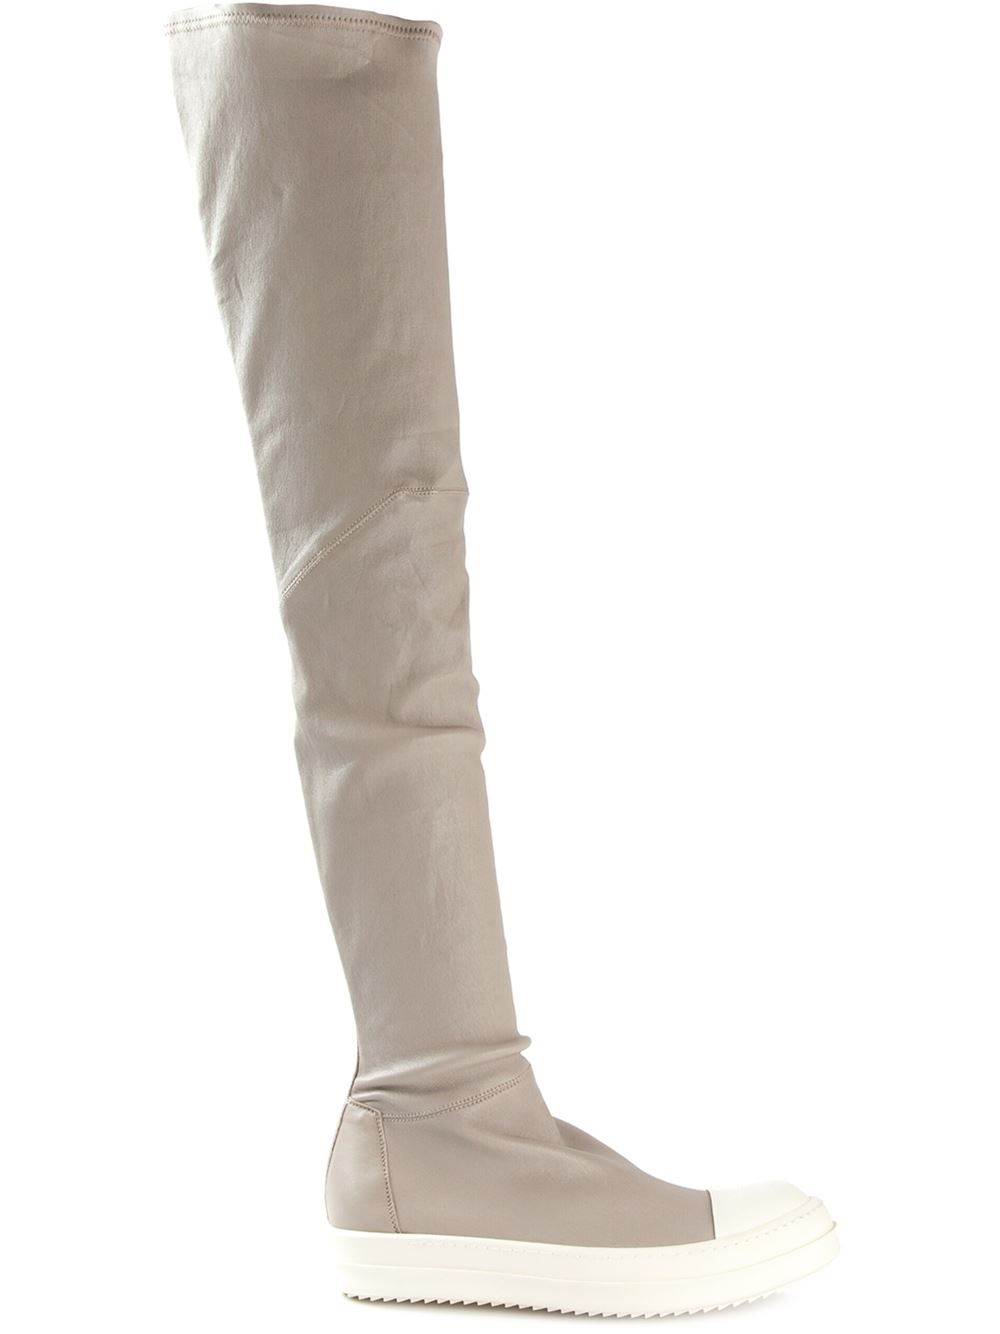 Rick Owens 'Ramones' Thigh High Boots in Grey (Gray) - Lyst